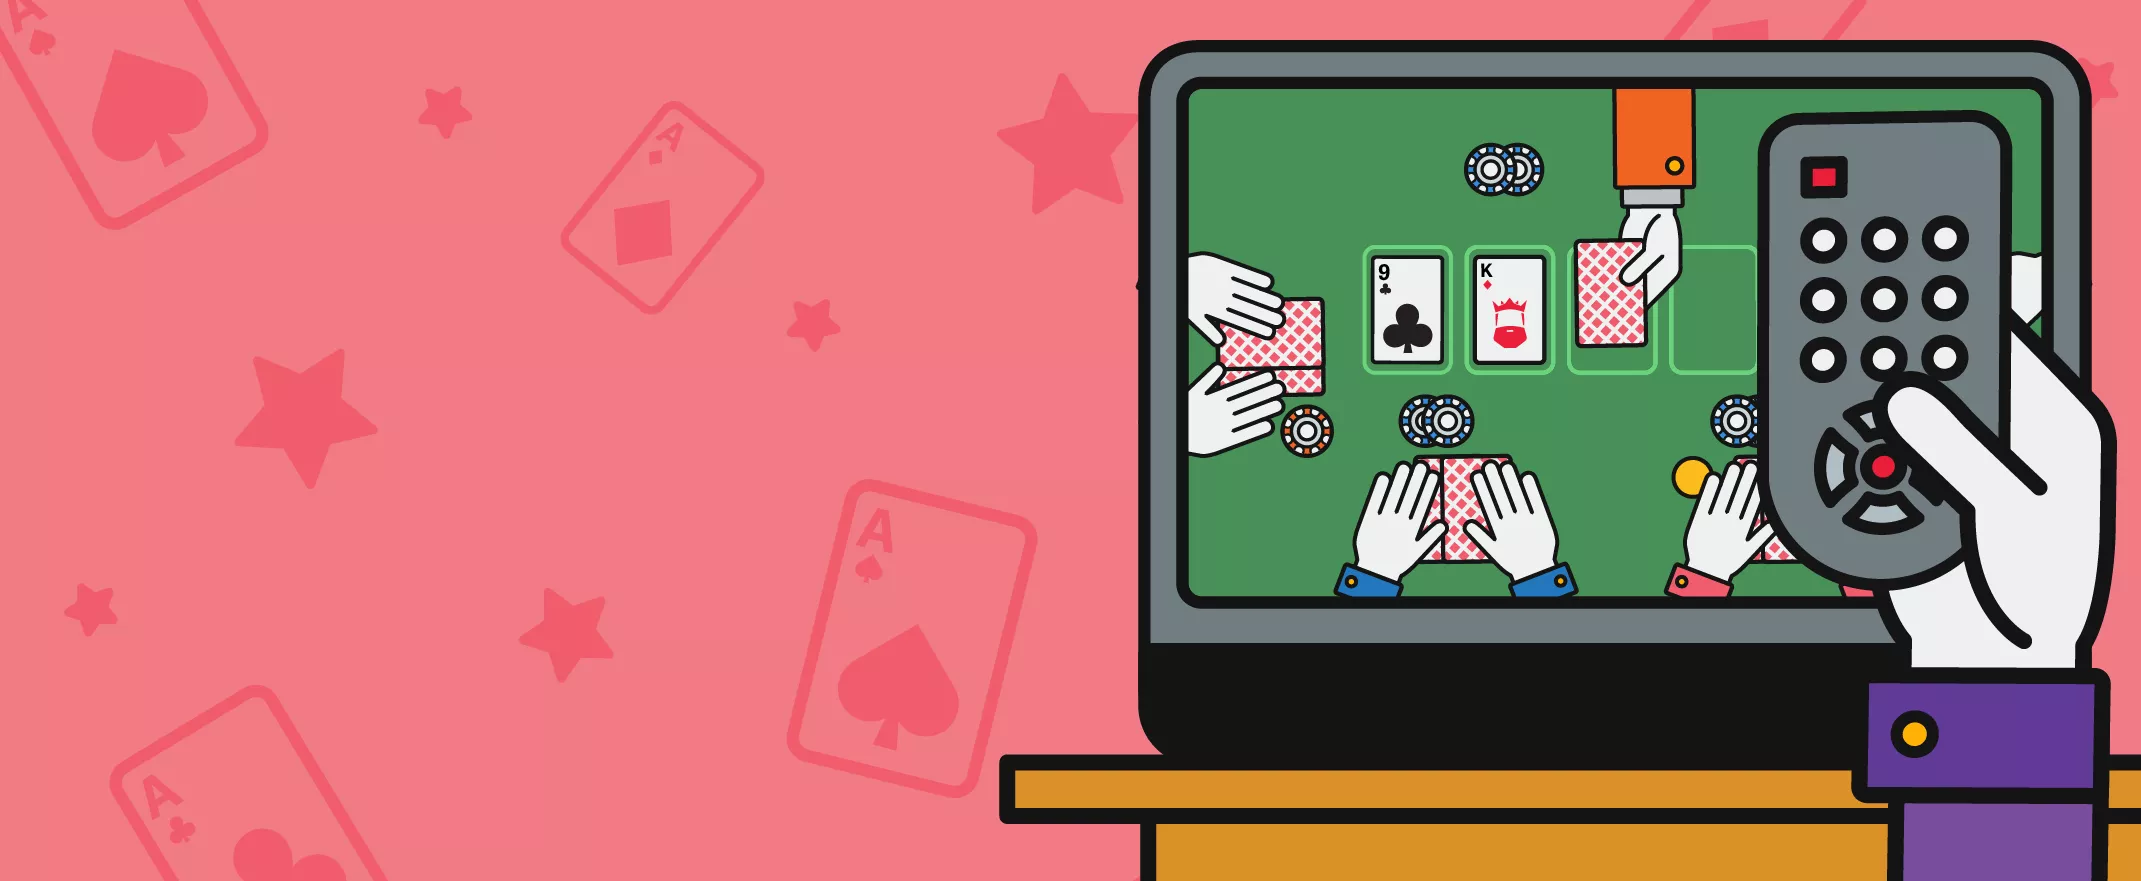 Poker guides - How to win at poker - learn to know the other players